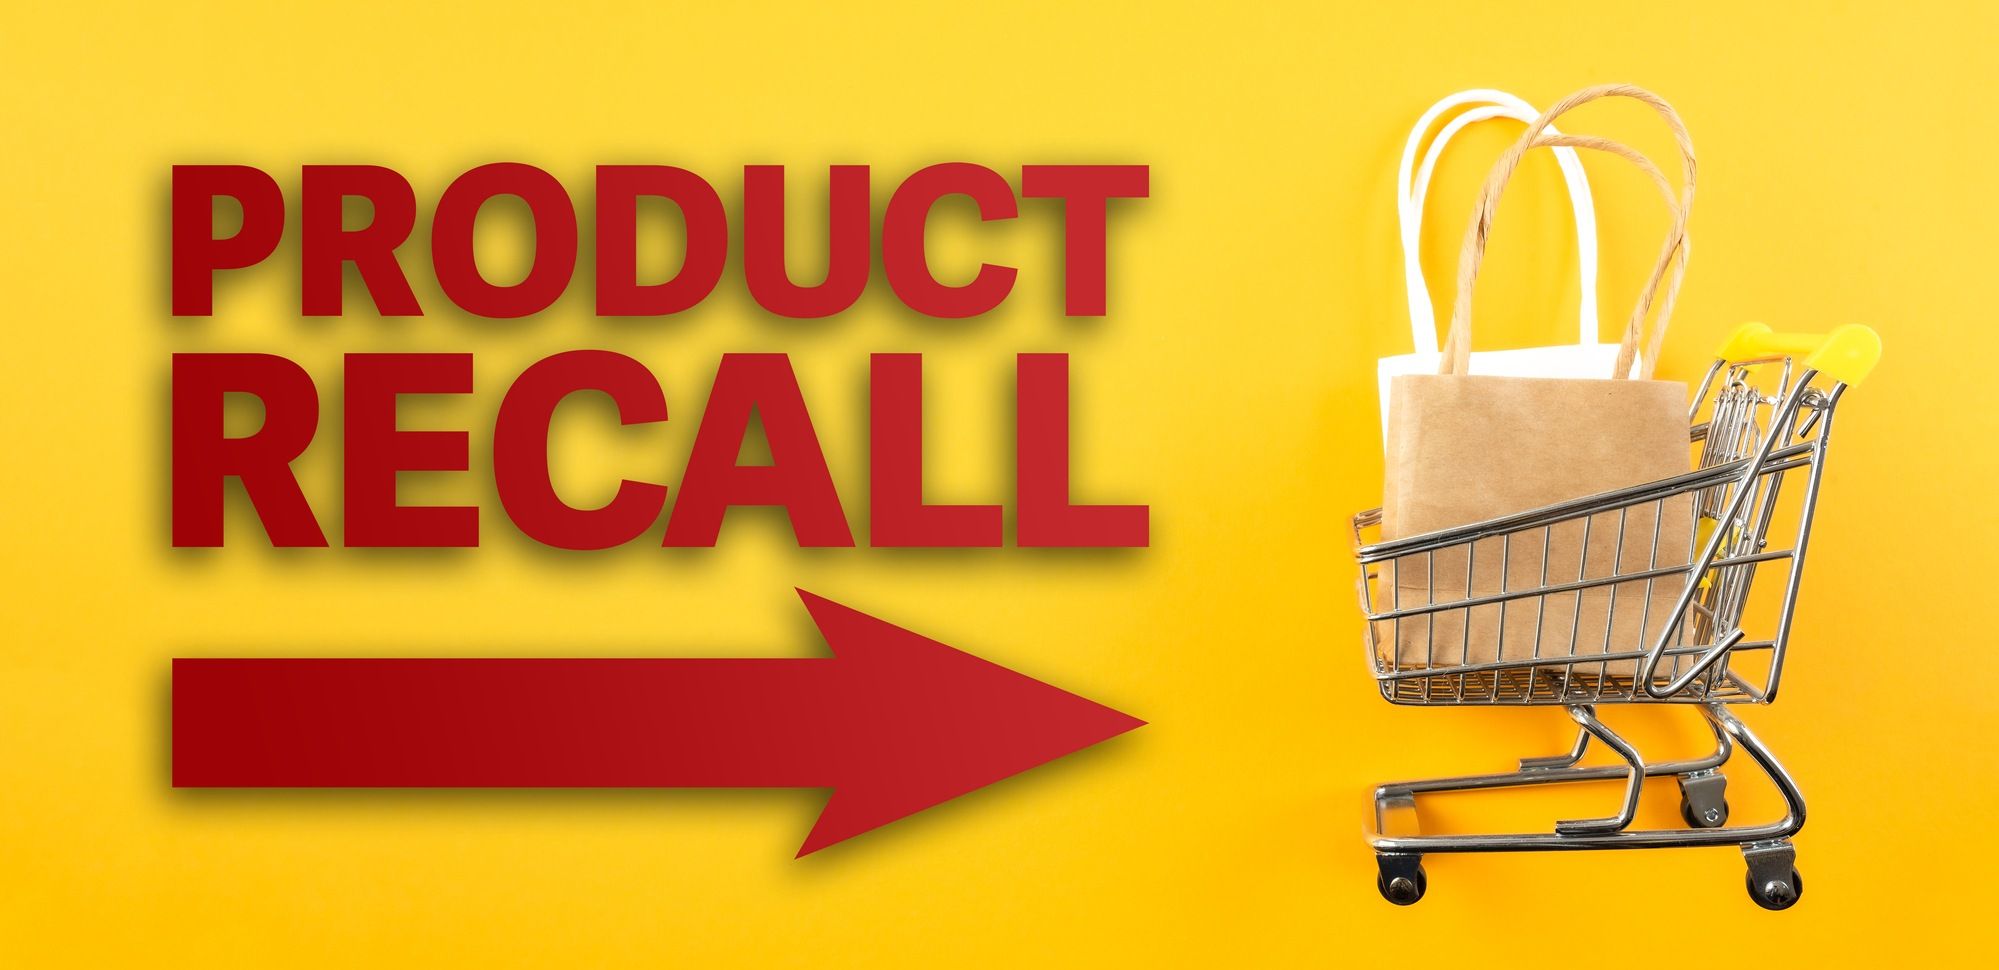 Product recall sign regarding the hazardous products being recalled